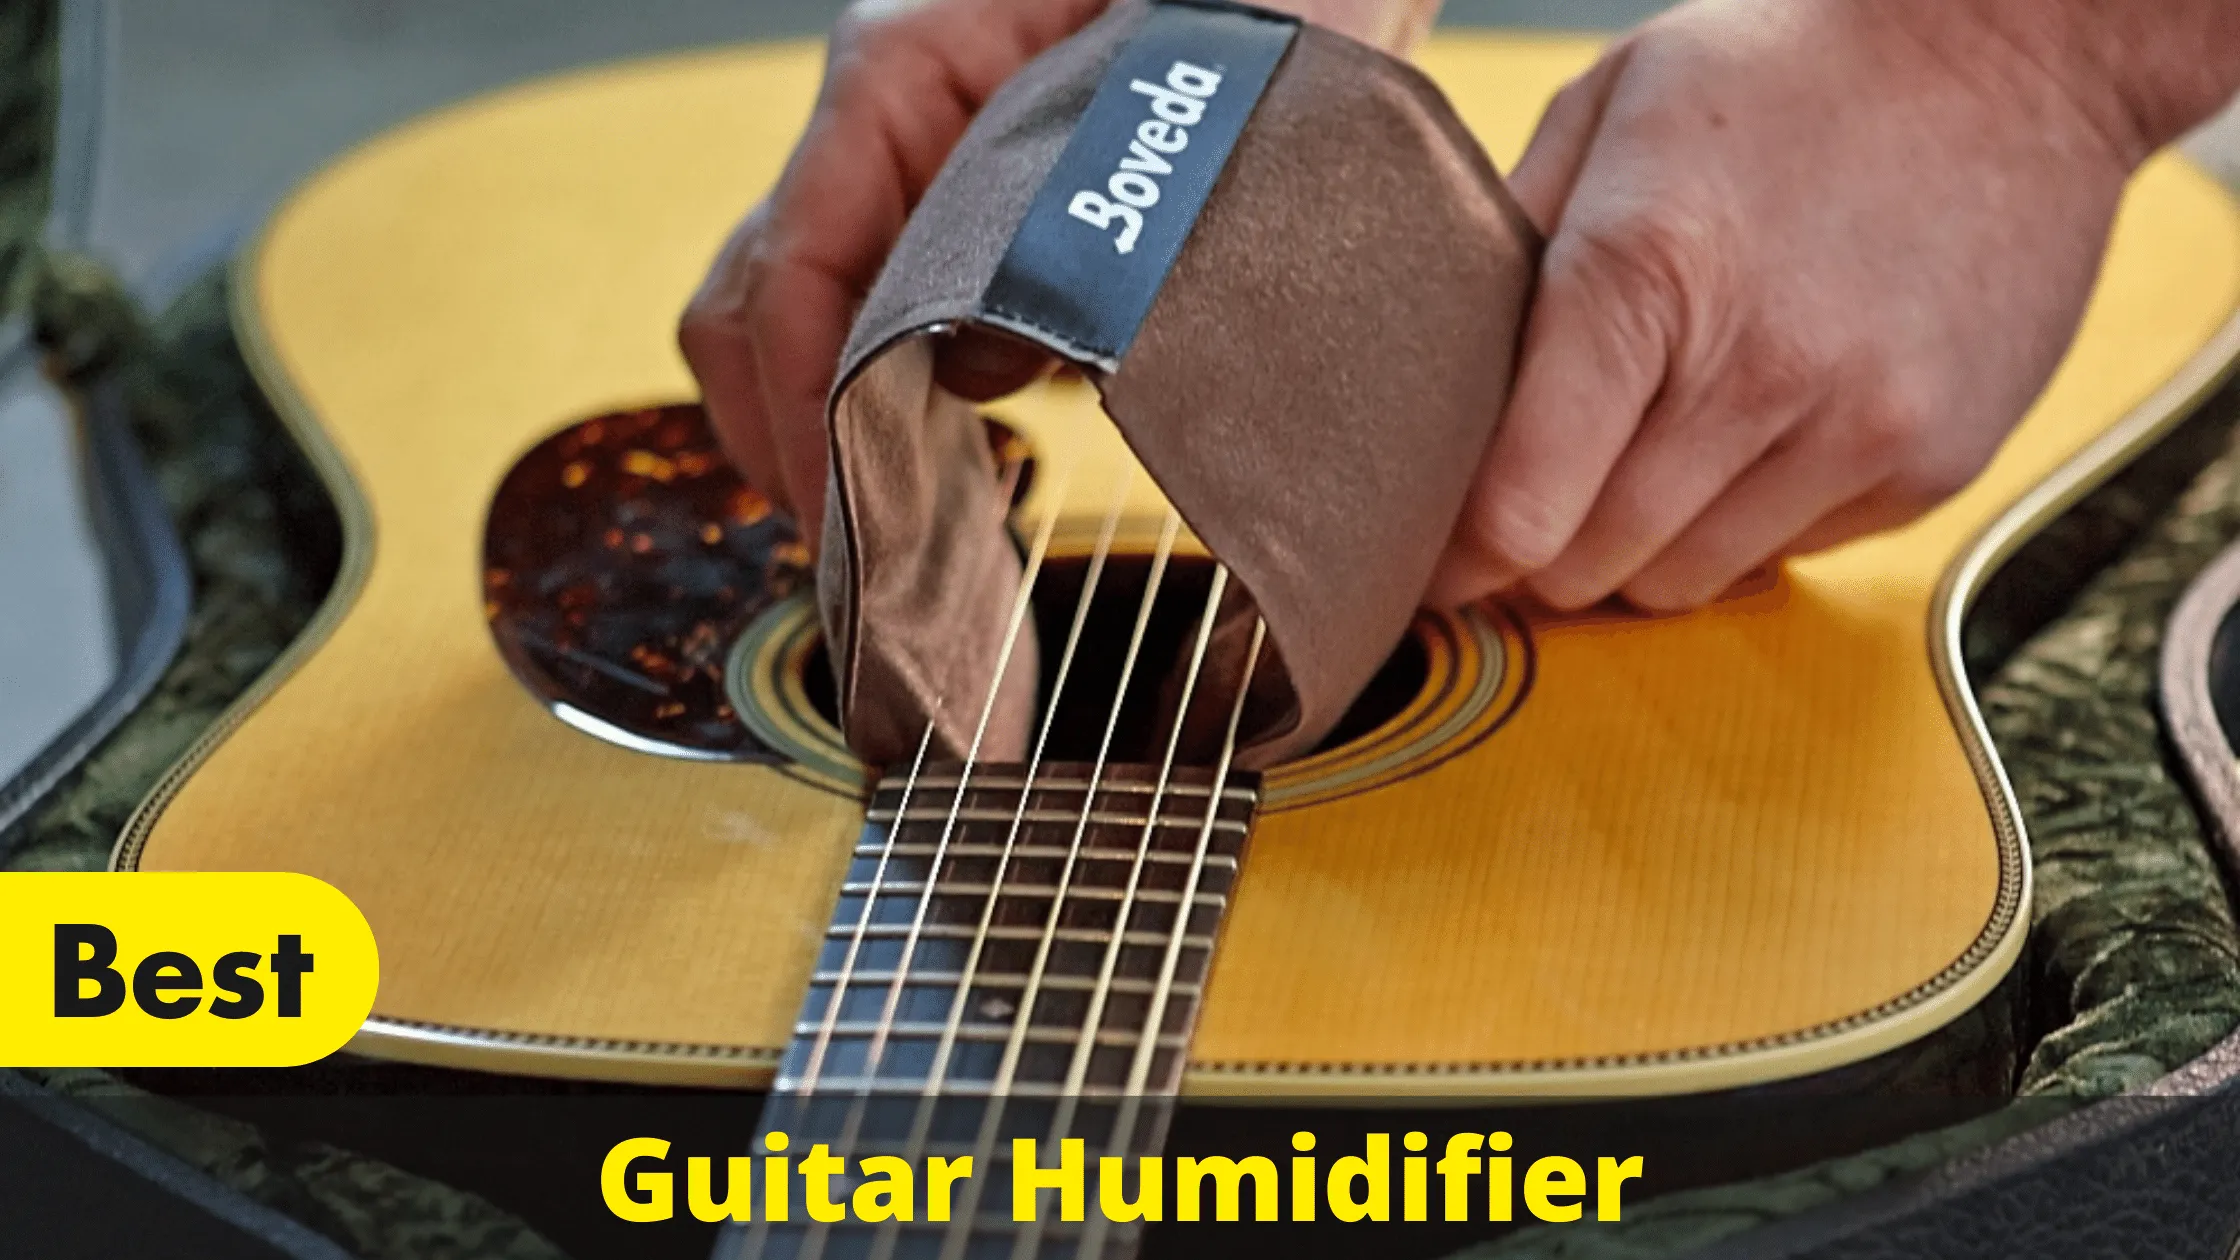 Top 10 Best Guitar Humidifier - Latest Guide